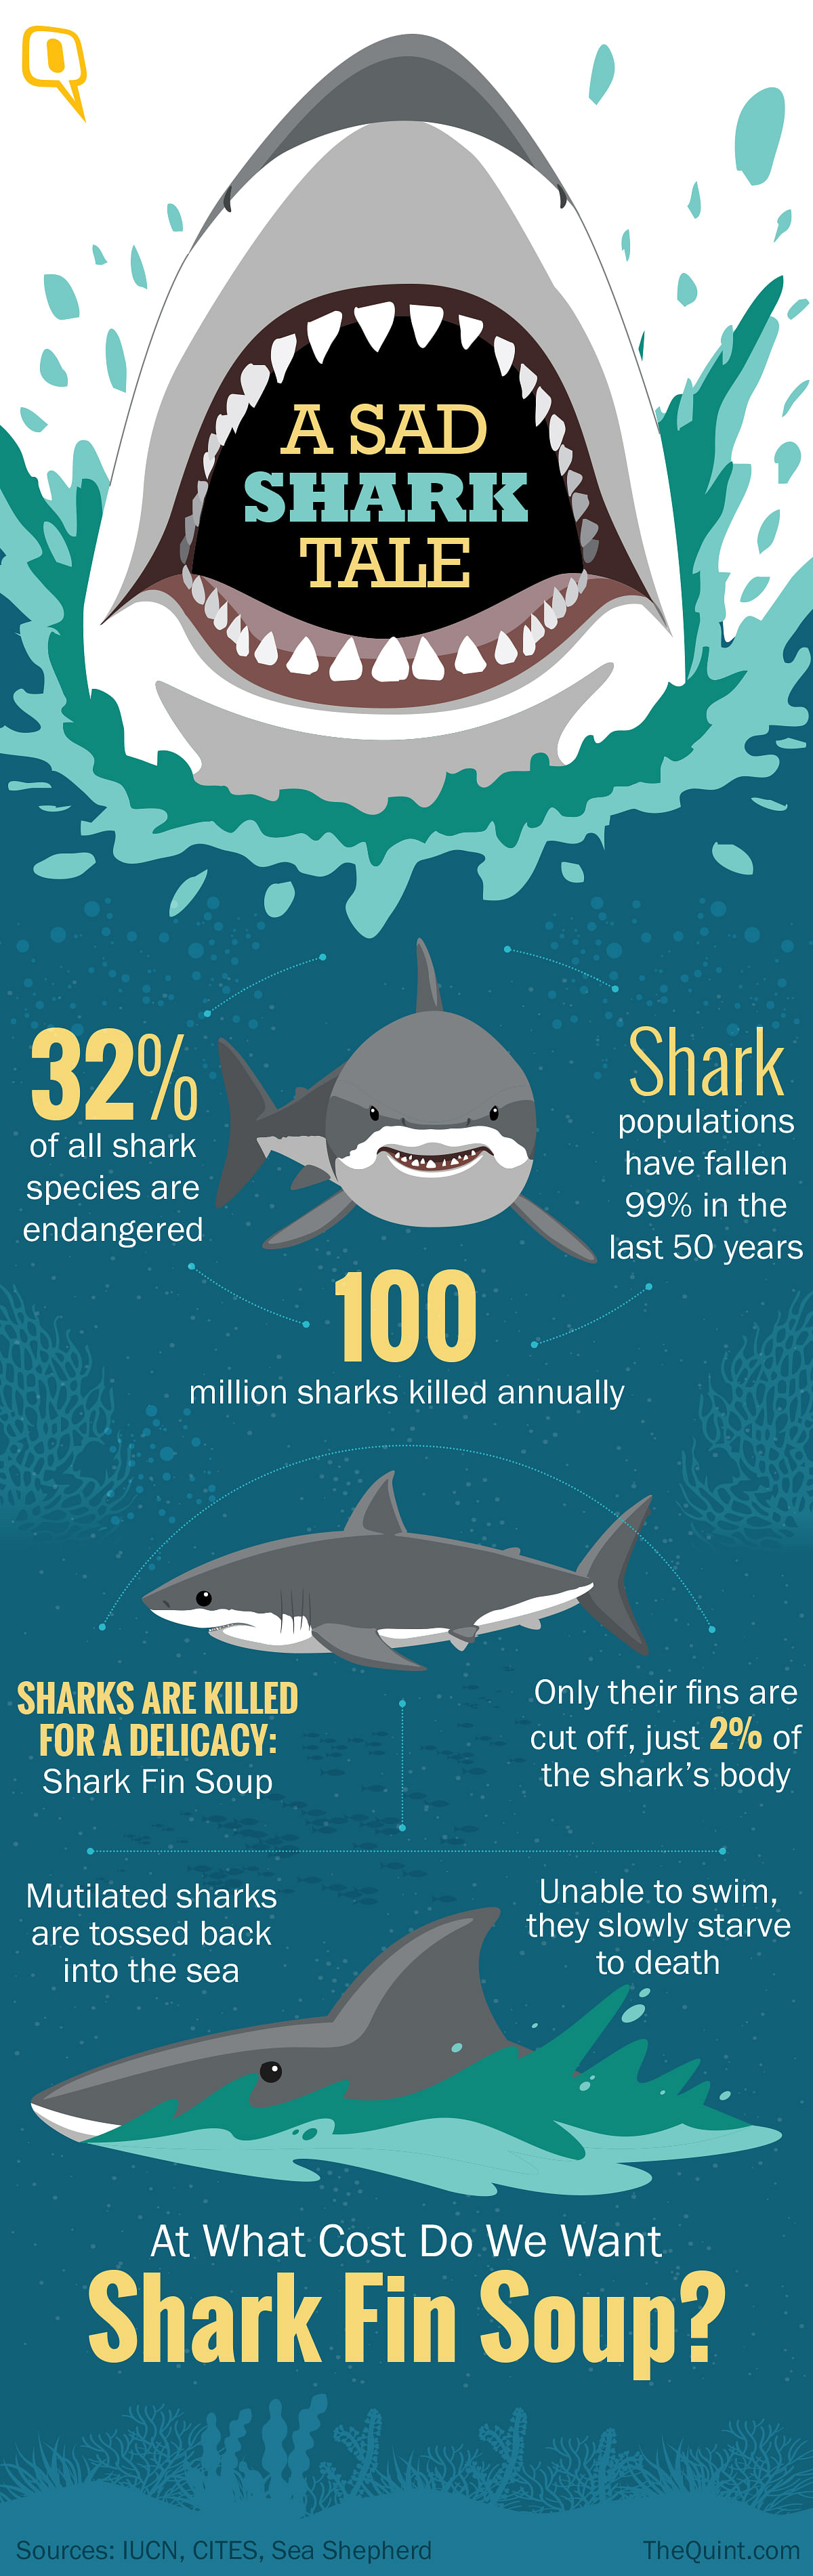 In cruel and unnecessary deaths, more than 100 million sharks are killed annually by human activities.